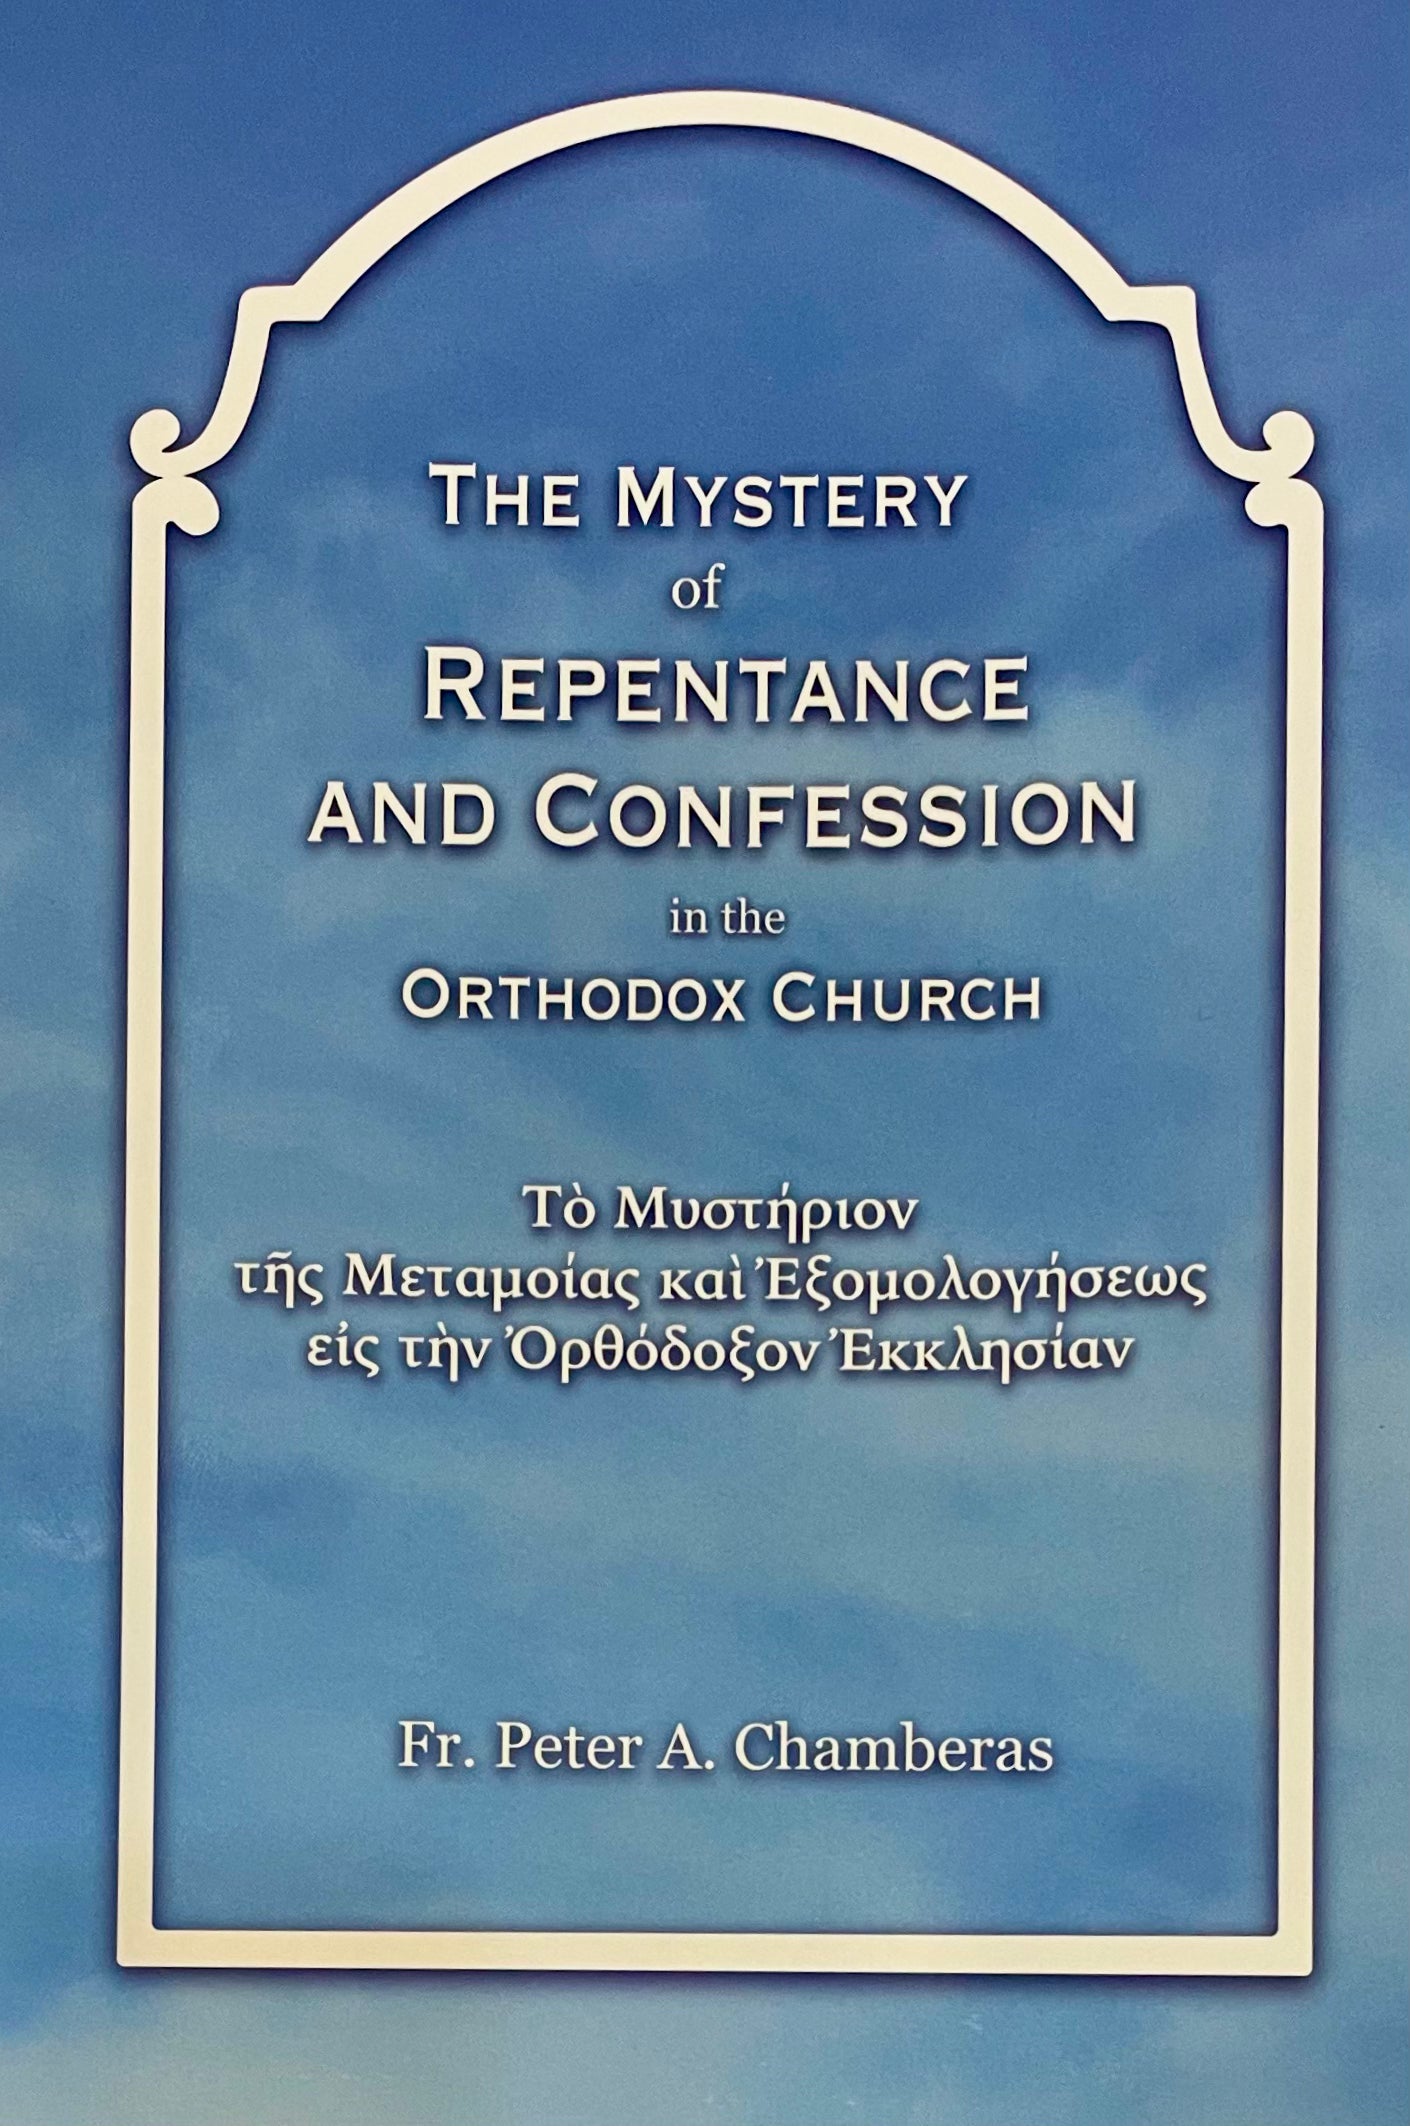 THE MYSTERY OF REPENTANCE AND CONFESSION IN THE ORTHODOX CHURCH